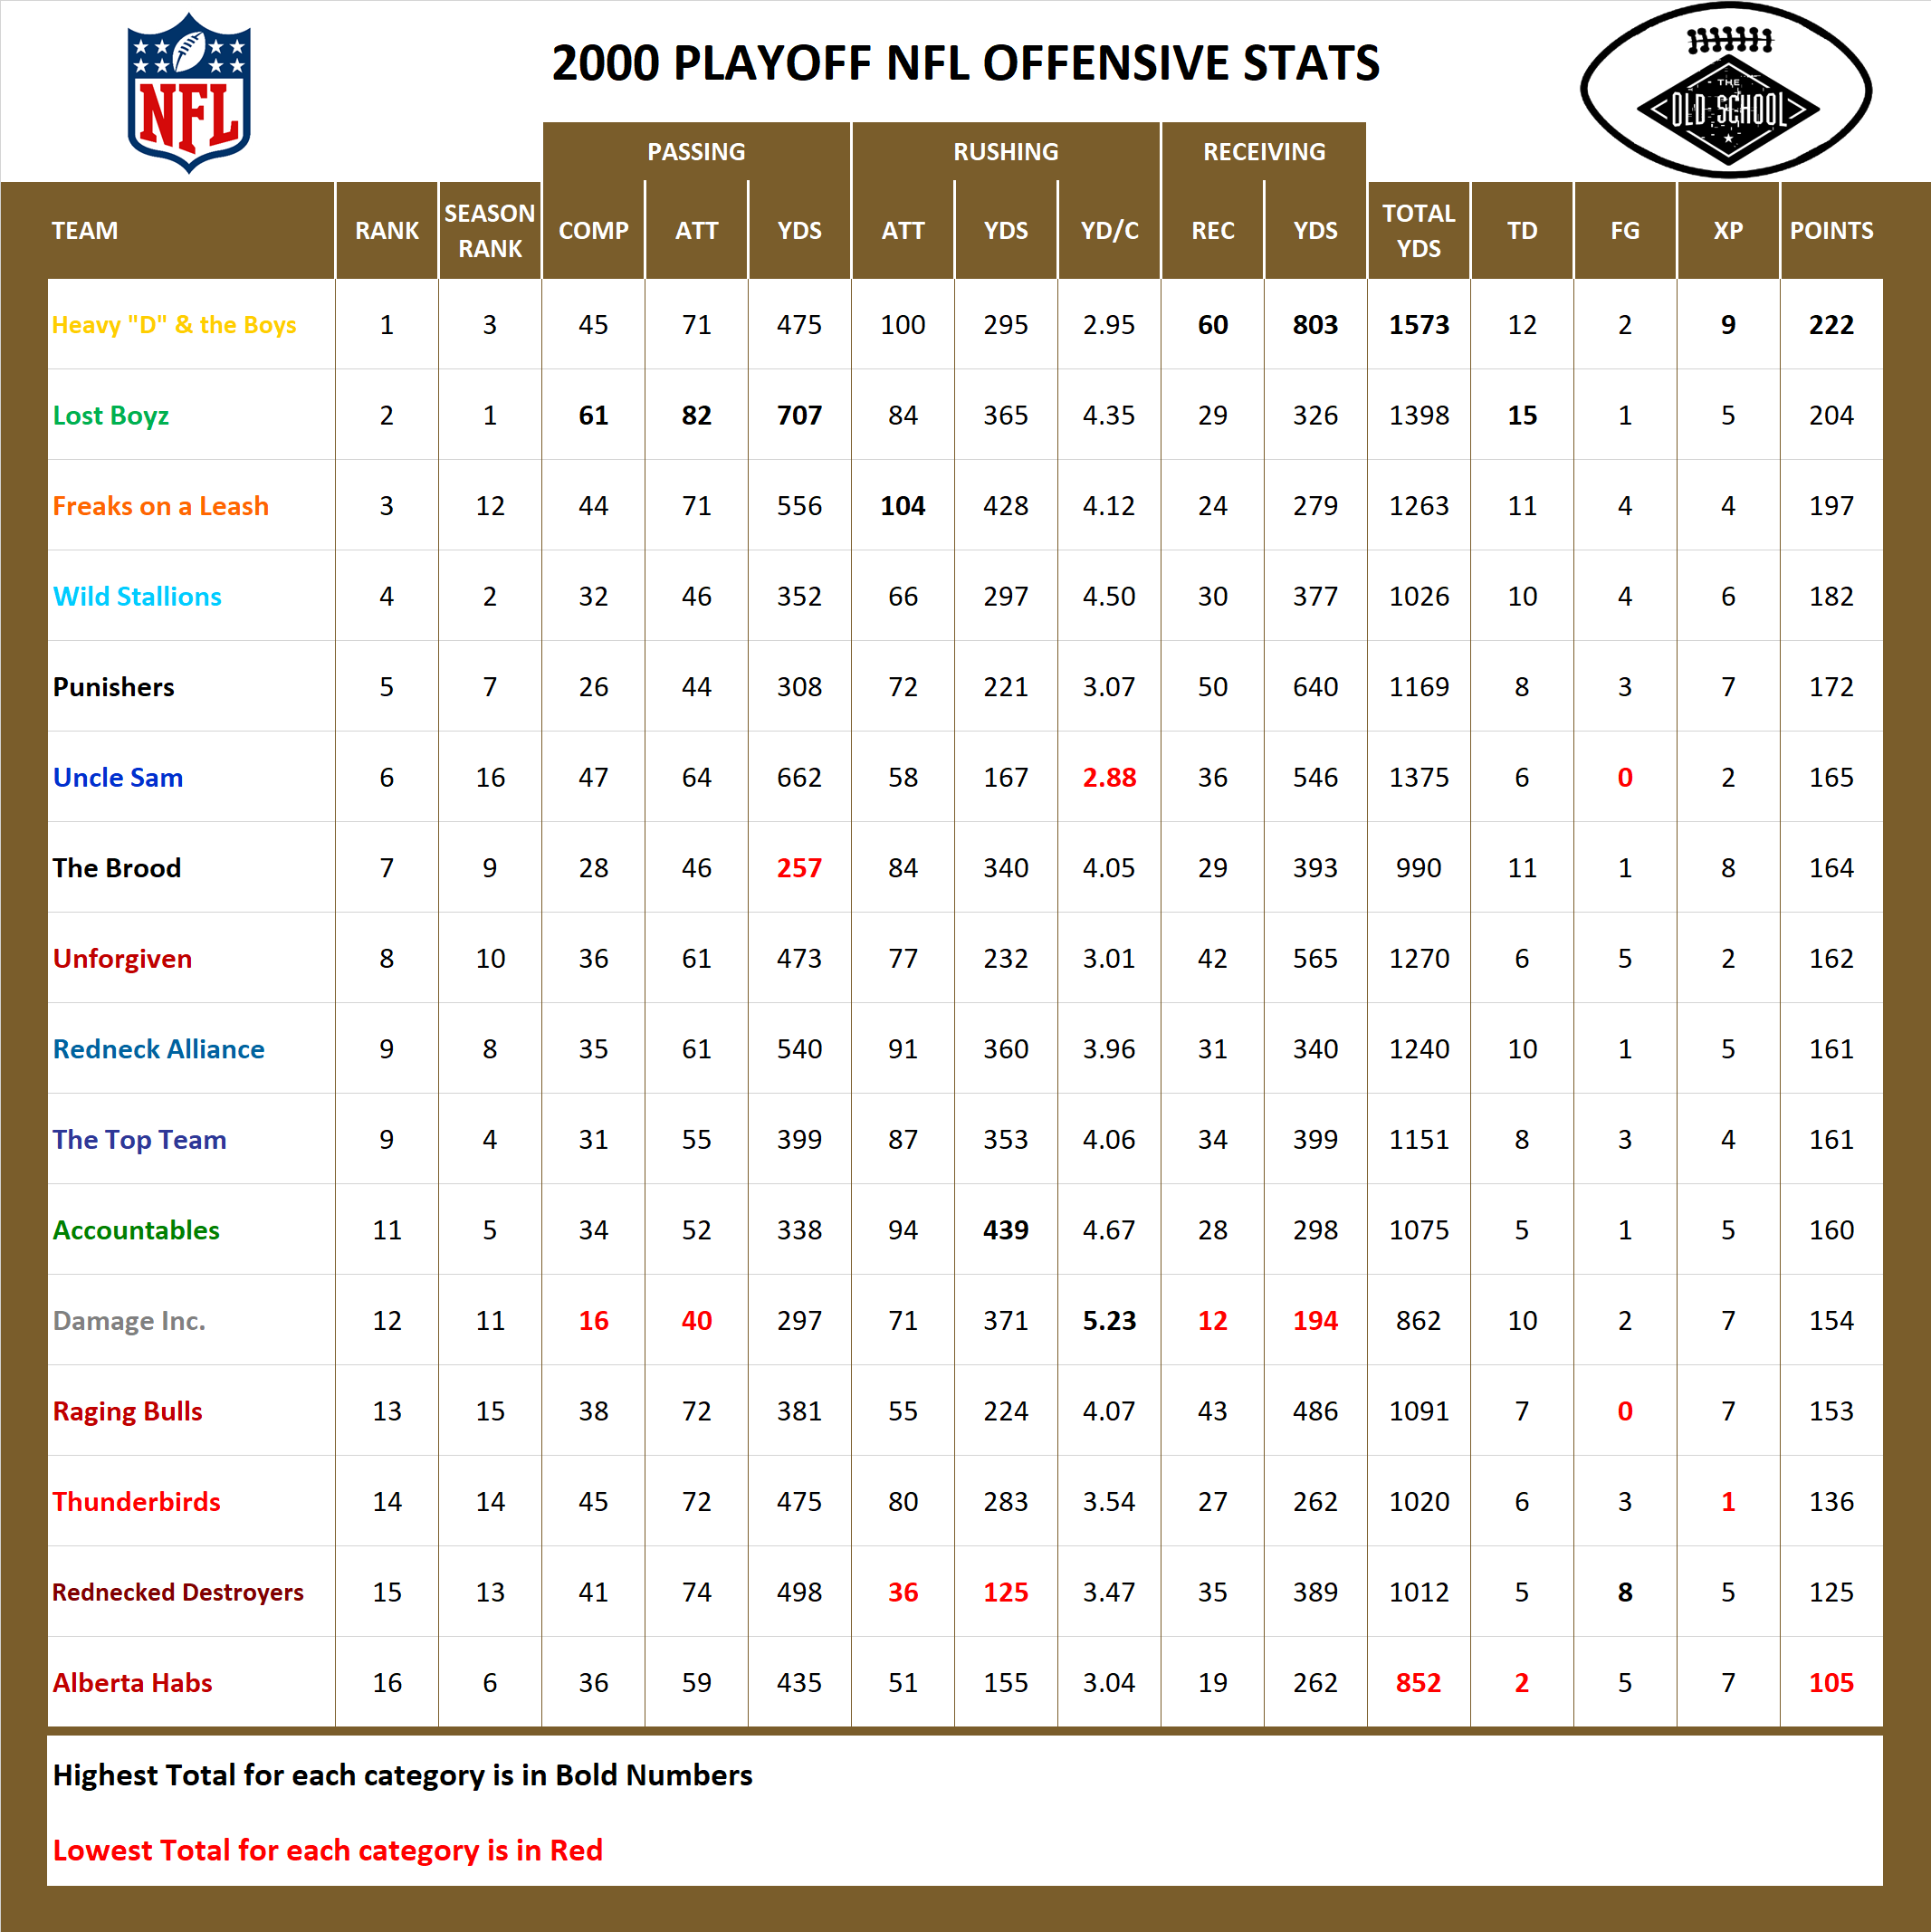 2000 National Football League Pool Playoff Offensive Stats